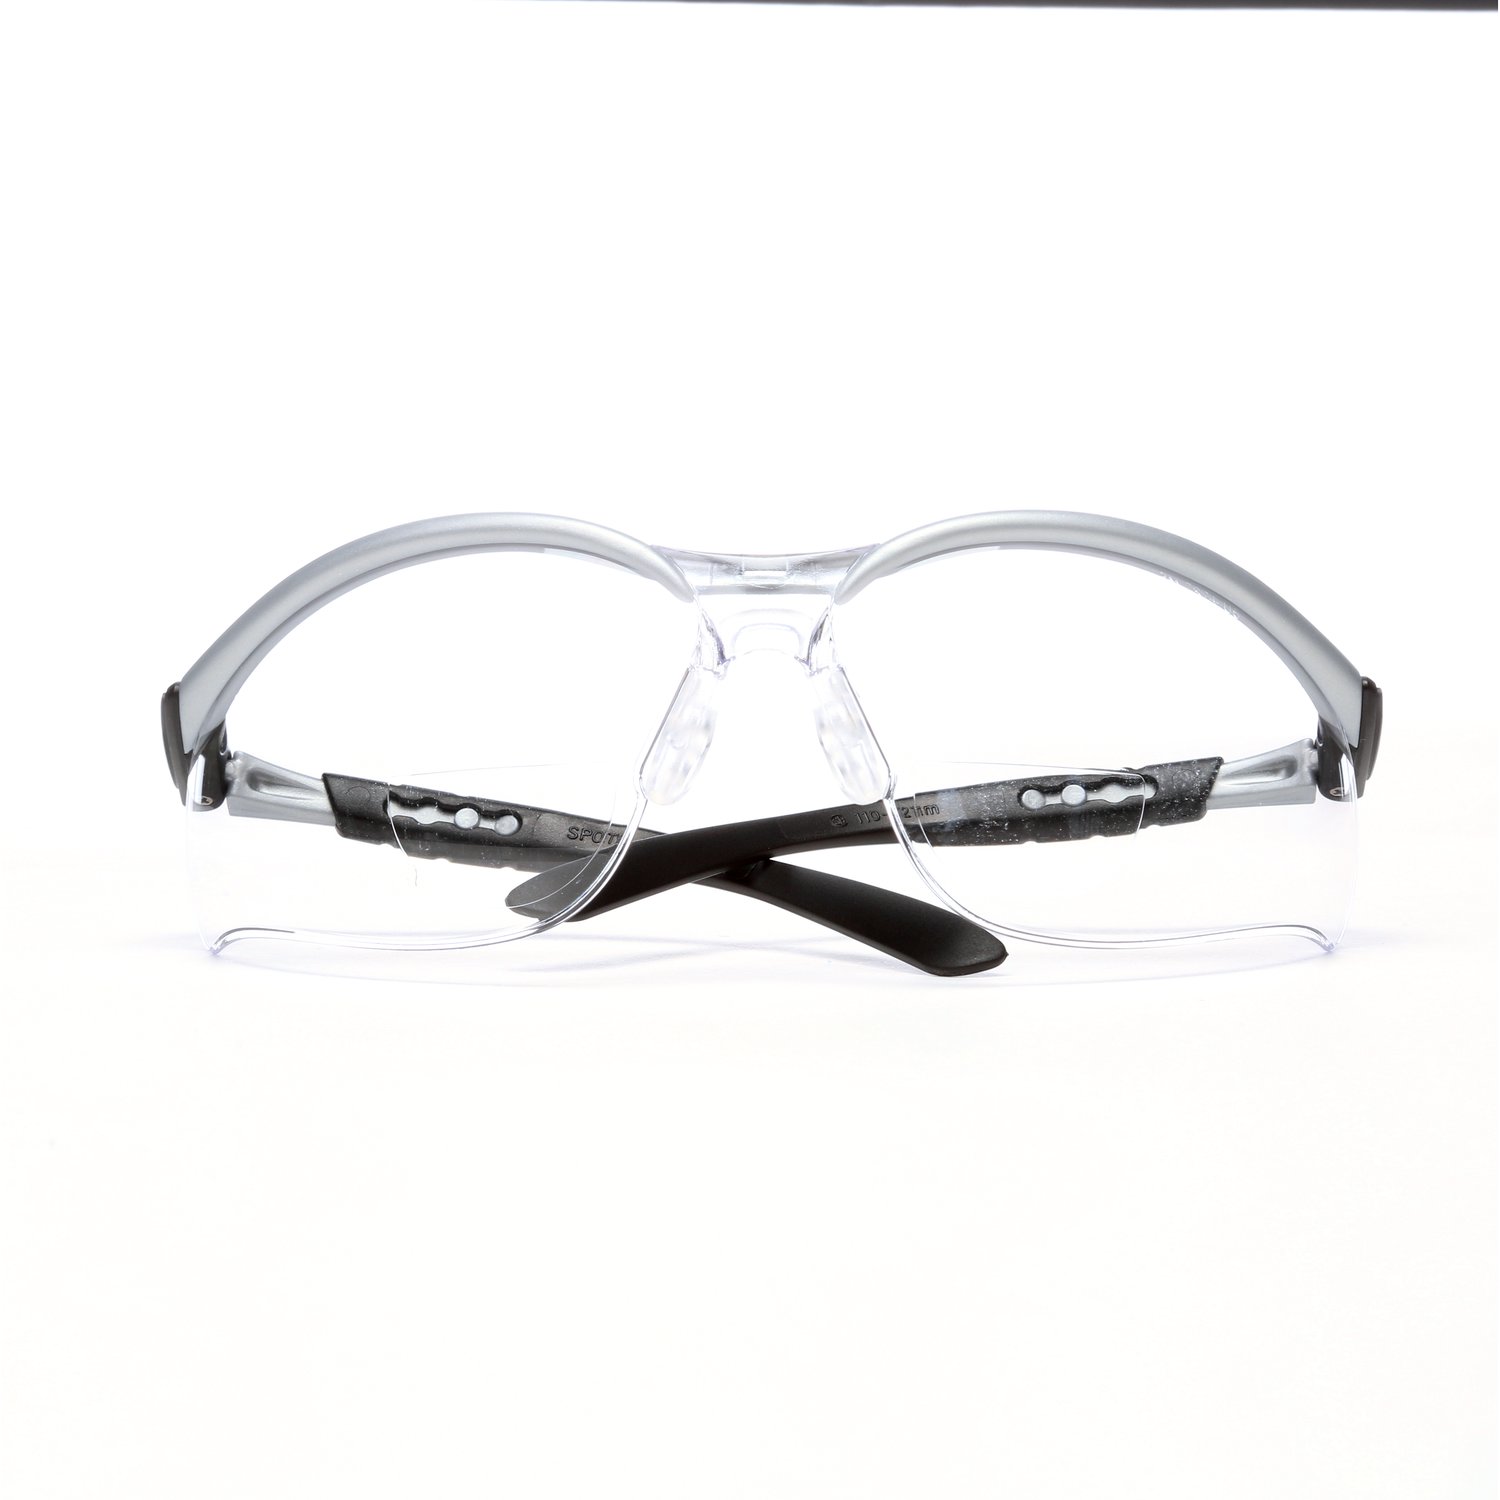 7000127491 - 3M BX Reader Protective Eyewear 11376-00000-20, Clear Lens, Silver
Frame, +2.5 Diopter, 20 ea/Case